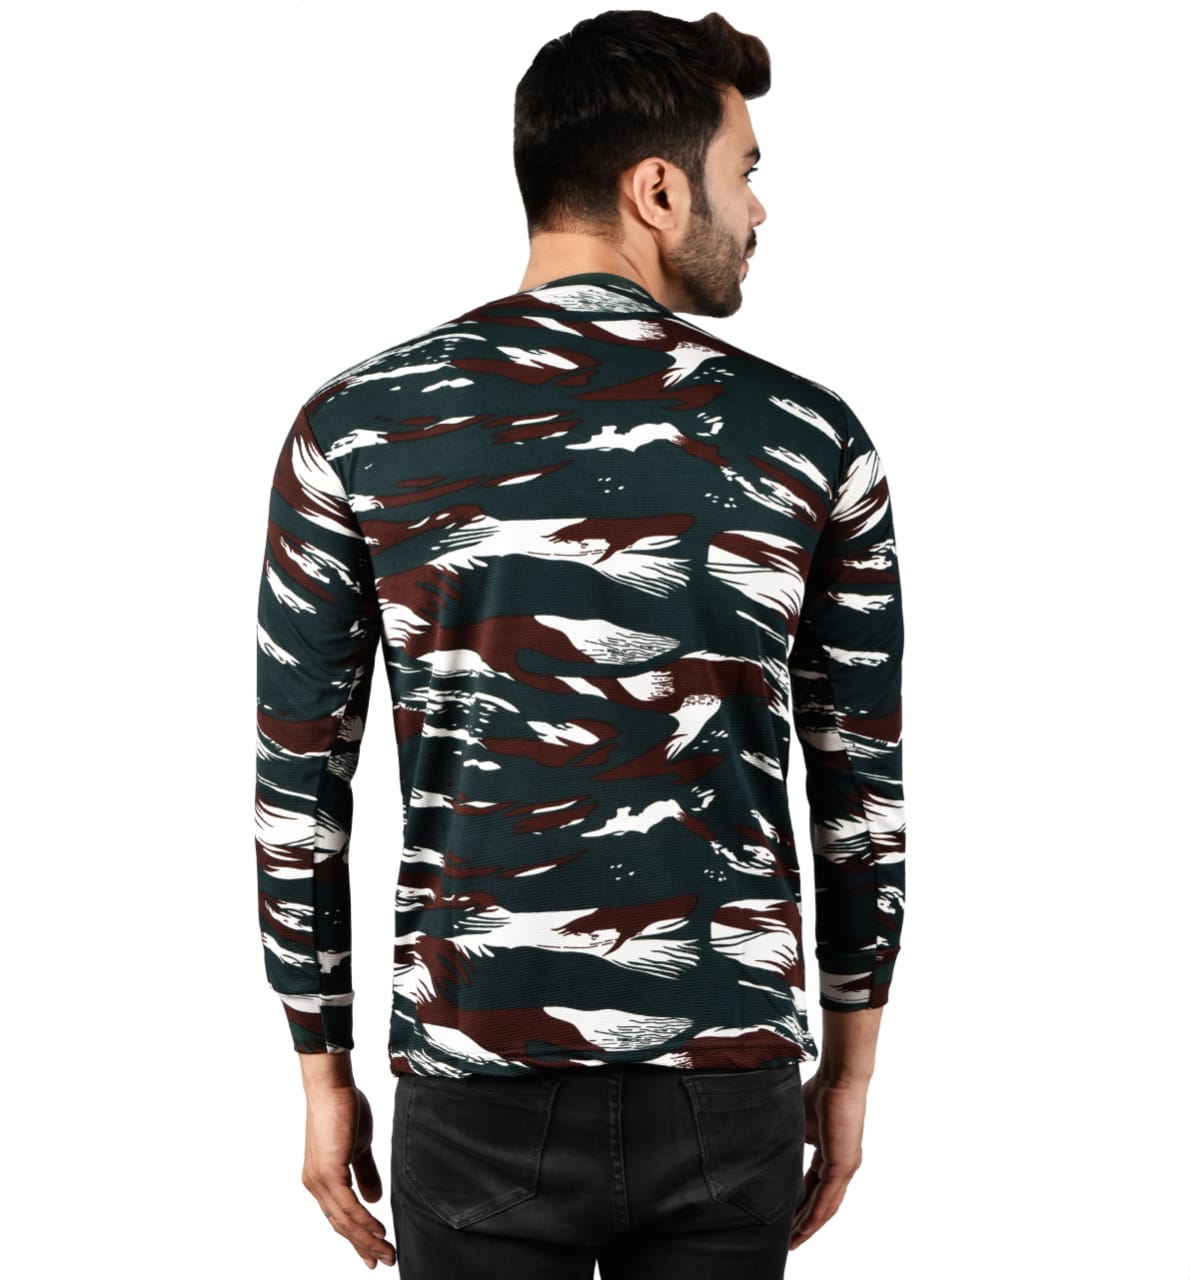 CRPF Unisex Camouflage Round Neck T Shirt Full Sleeve Army Military Defence